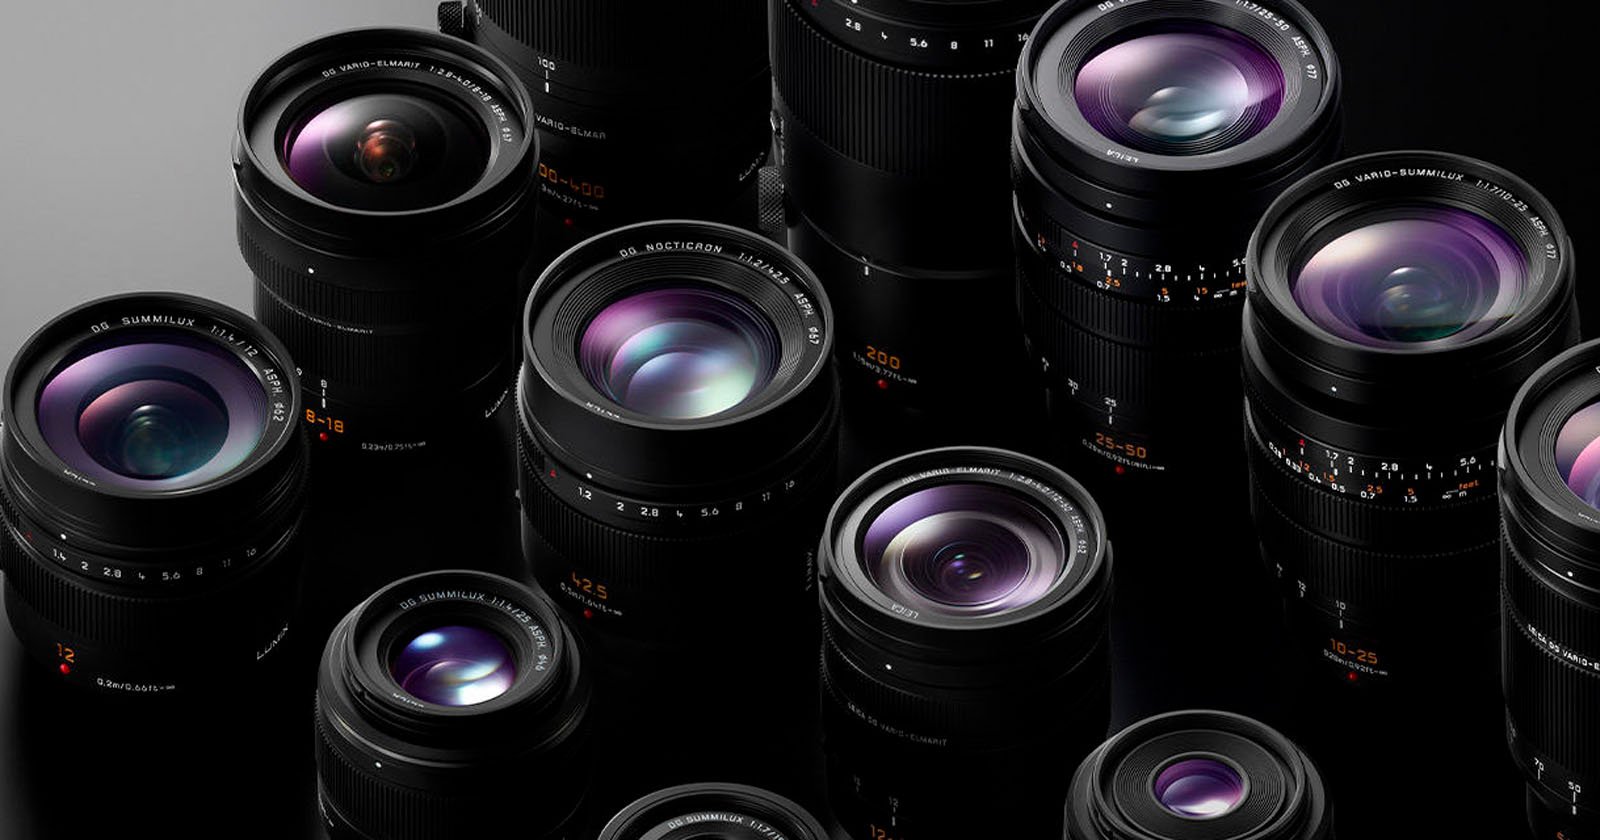  panasonic adds two more zoom lenses its l-mount 